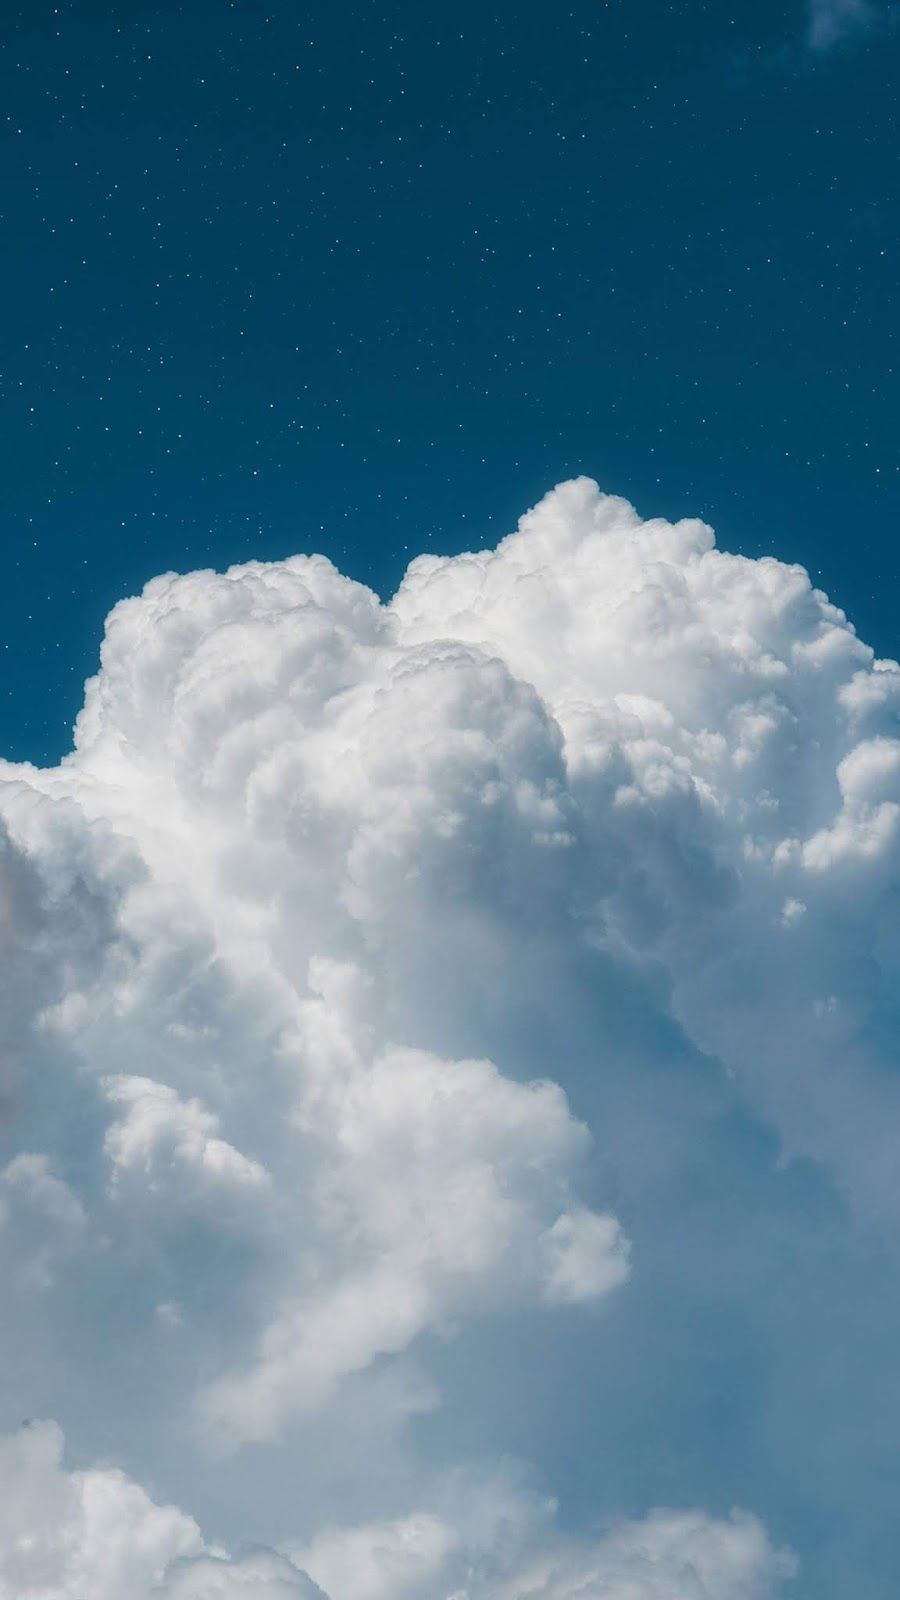 15 Greatest wallpaper aesthetic cloud You Can Use It For Free ...